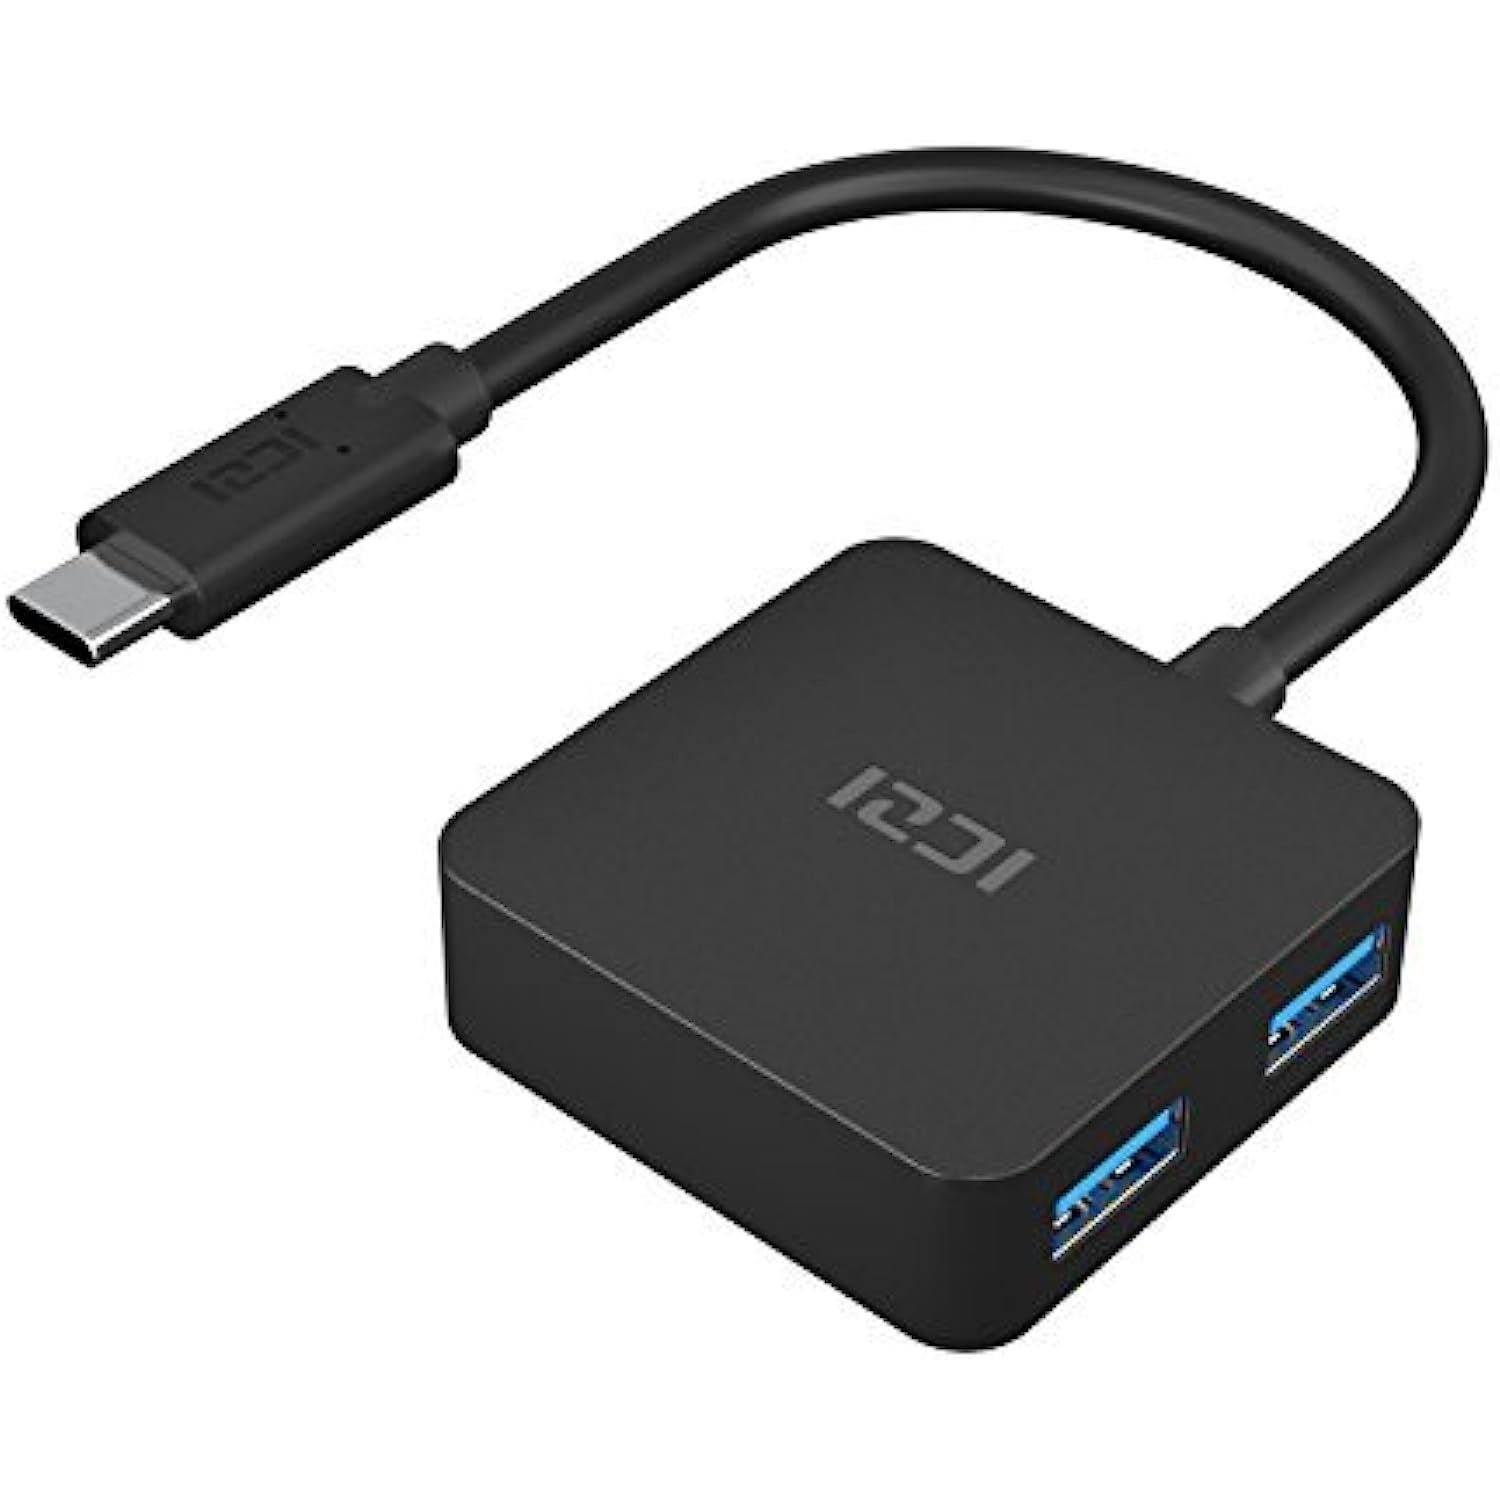 Ultra Slim Thunderbolt 3 Adapter with 4 Port USB 3.0 Data Converter for MacBook Pro, ChromeBook Pixel, Galaxy S10 S9 pro, Surface Go, Oneplus